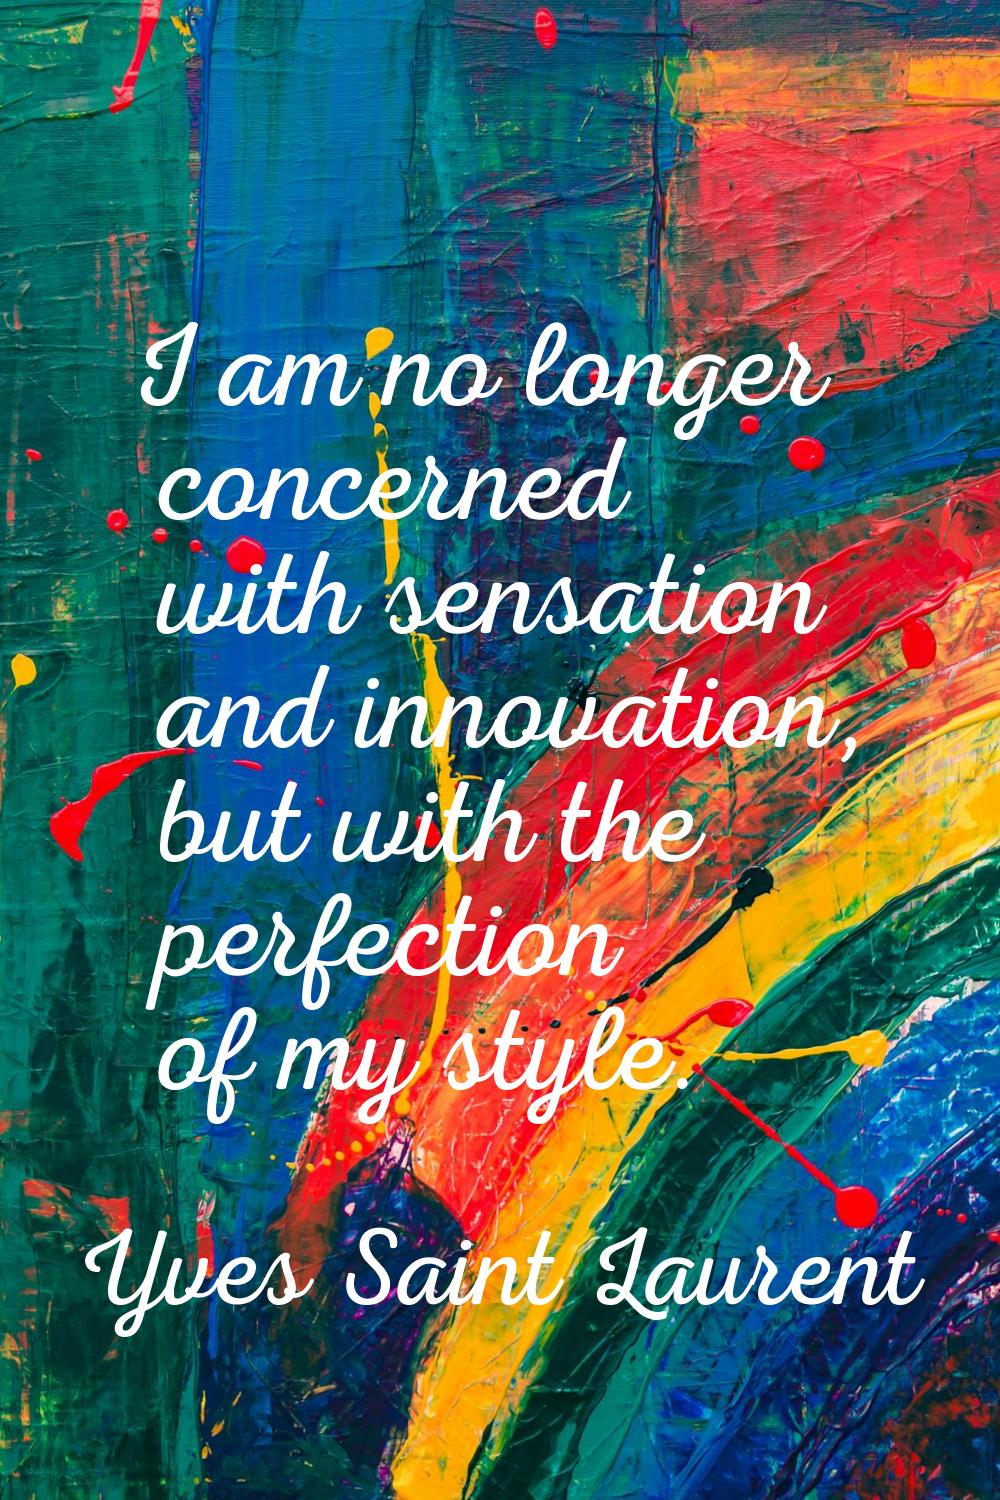 I am no longer concerned with sensation and innovation, but with the perfection of my style.